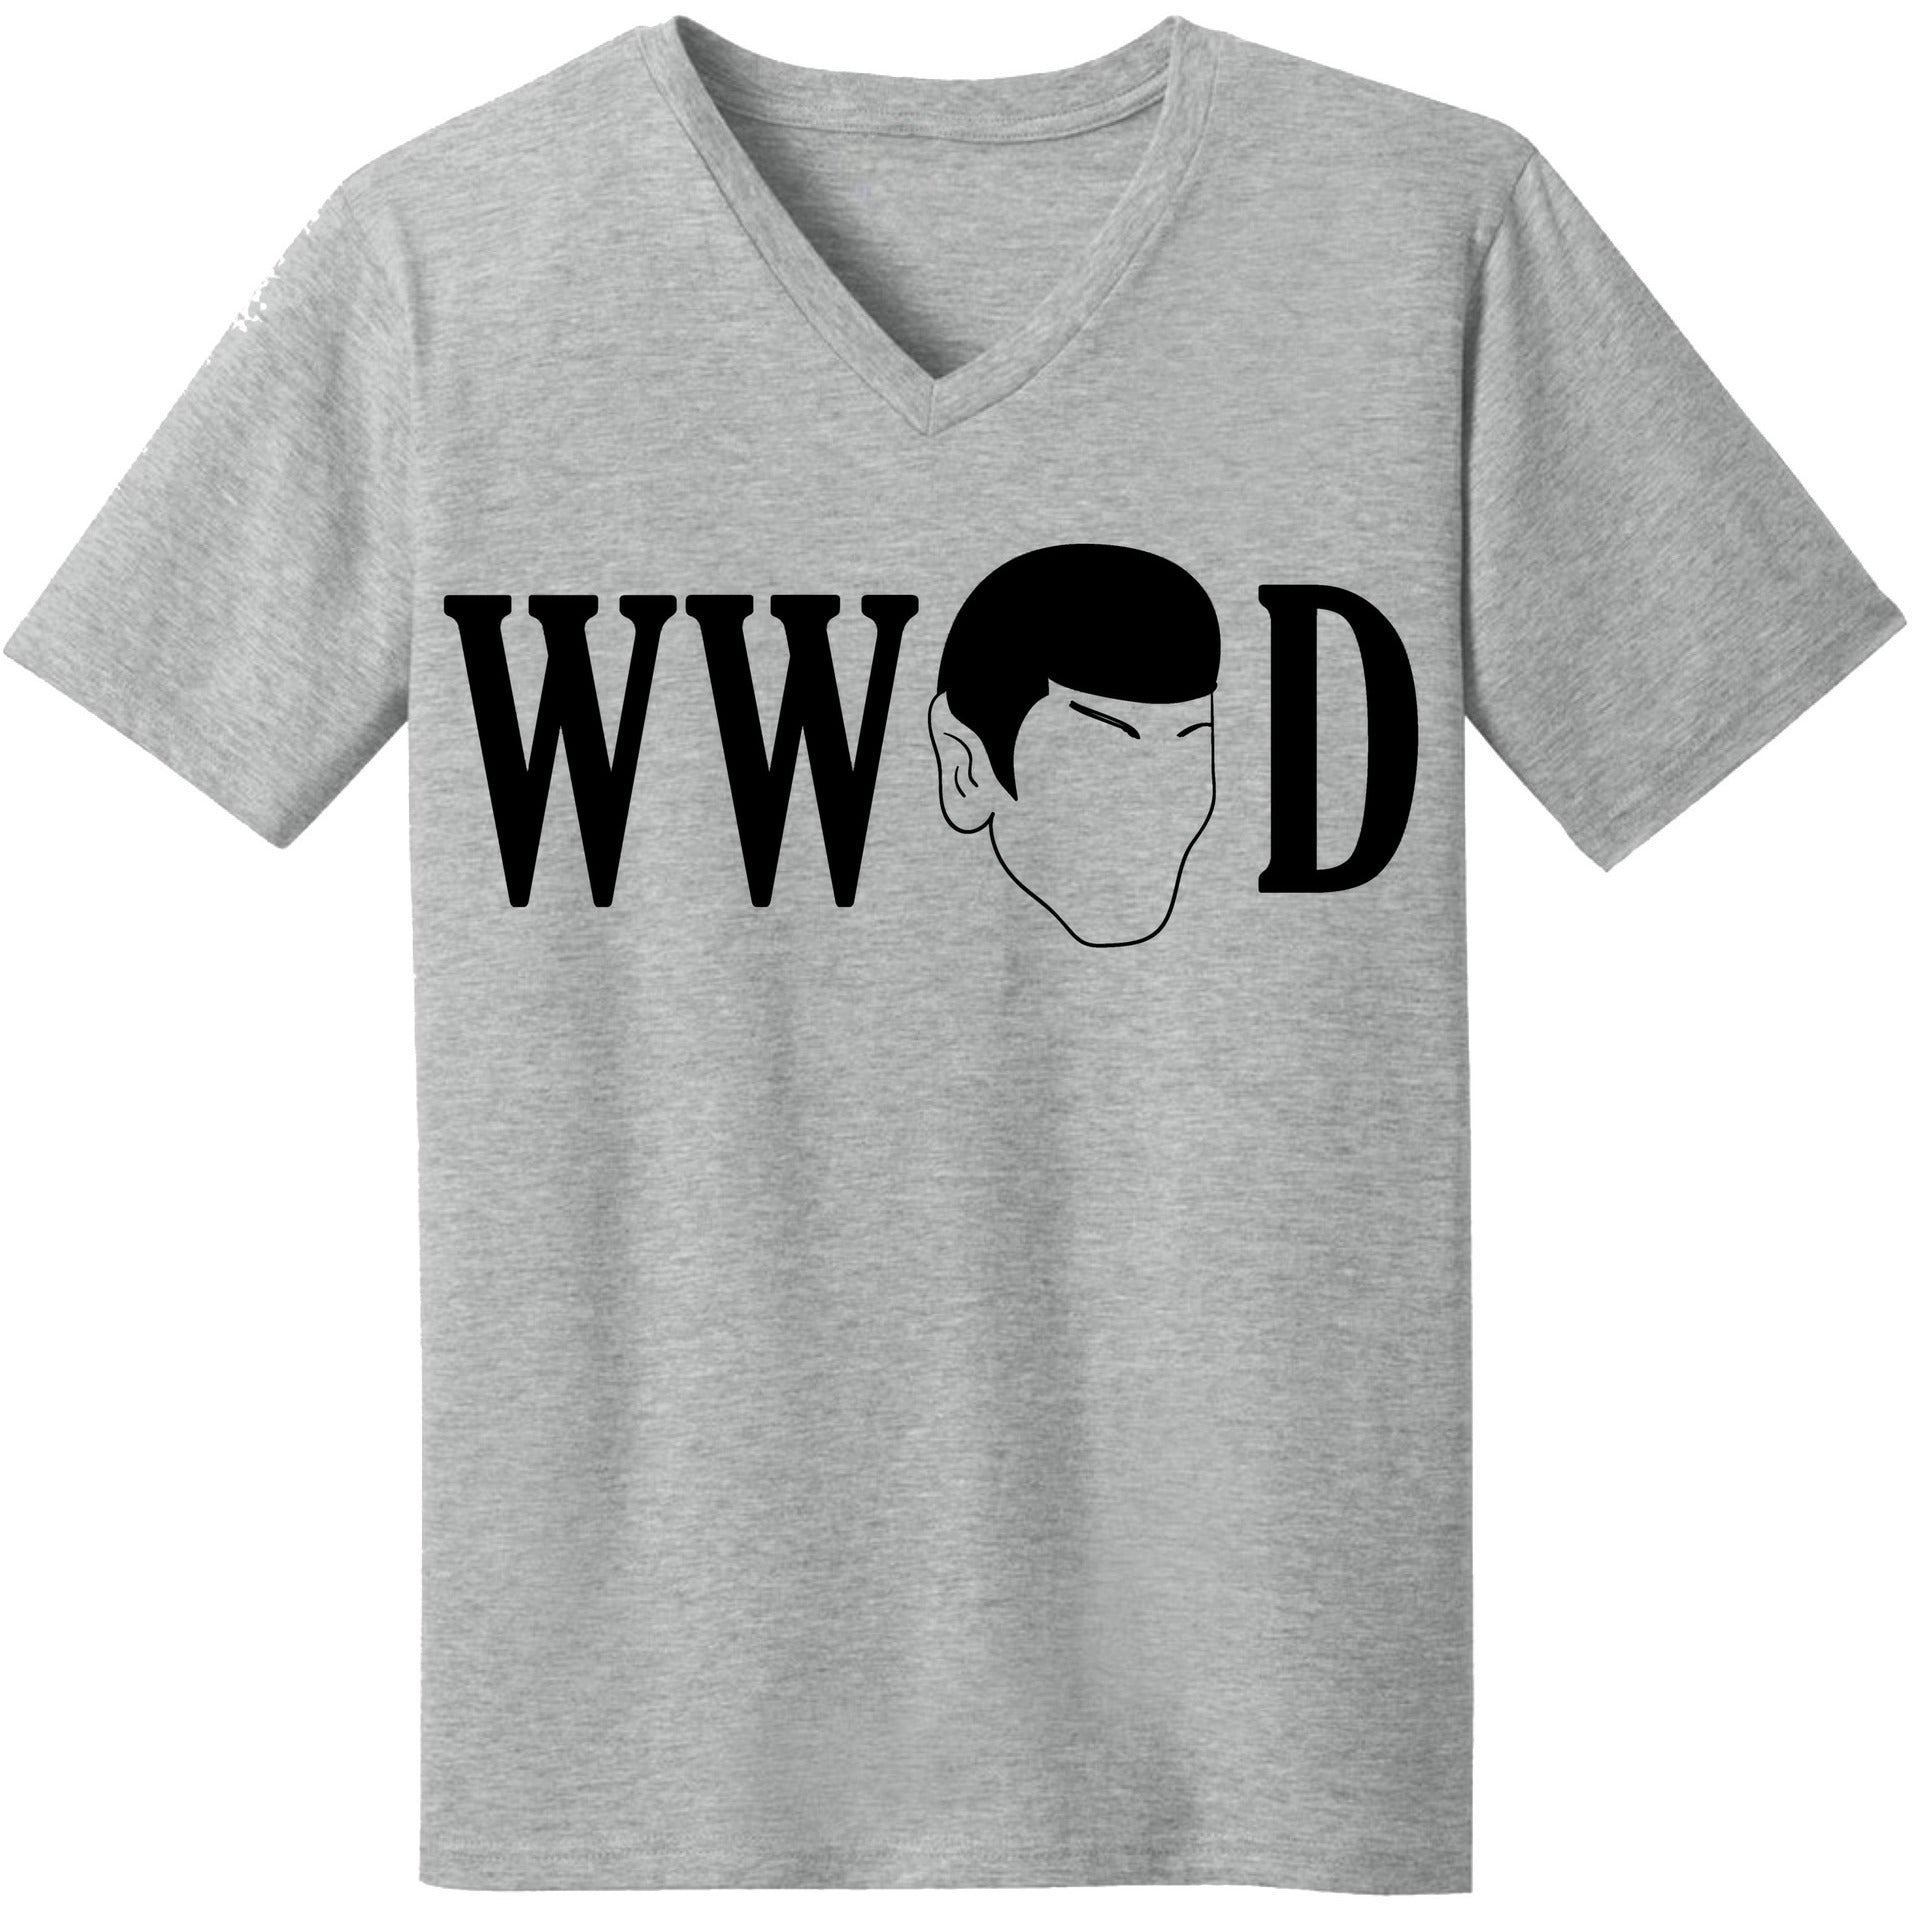 "WHAT WOULD SPOCK DO" V-Neck Tee in Heather Grey - Unisex and Ladies Sizes - Leonard Nimoy's Shop LLAP